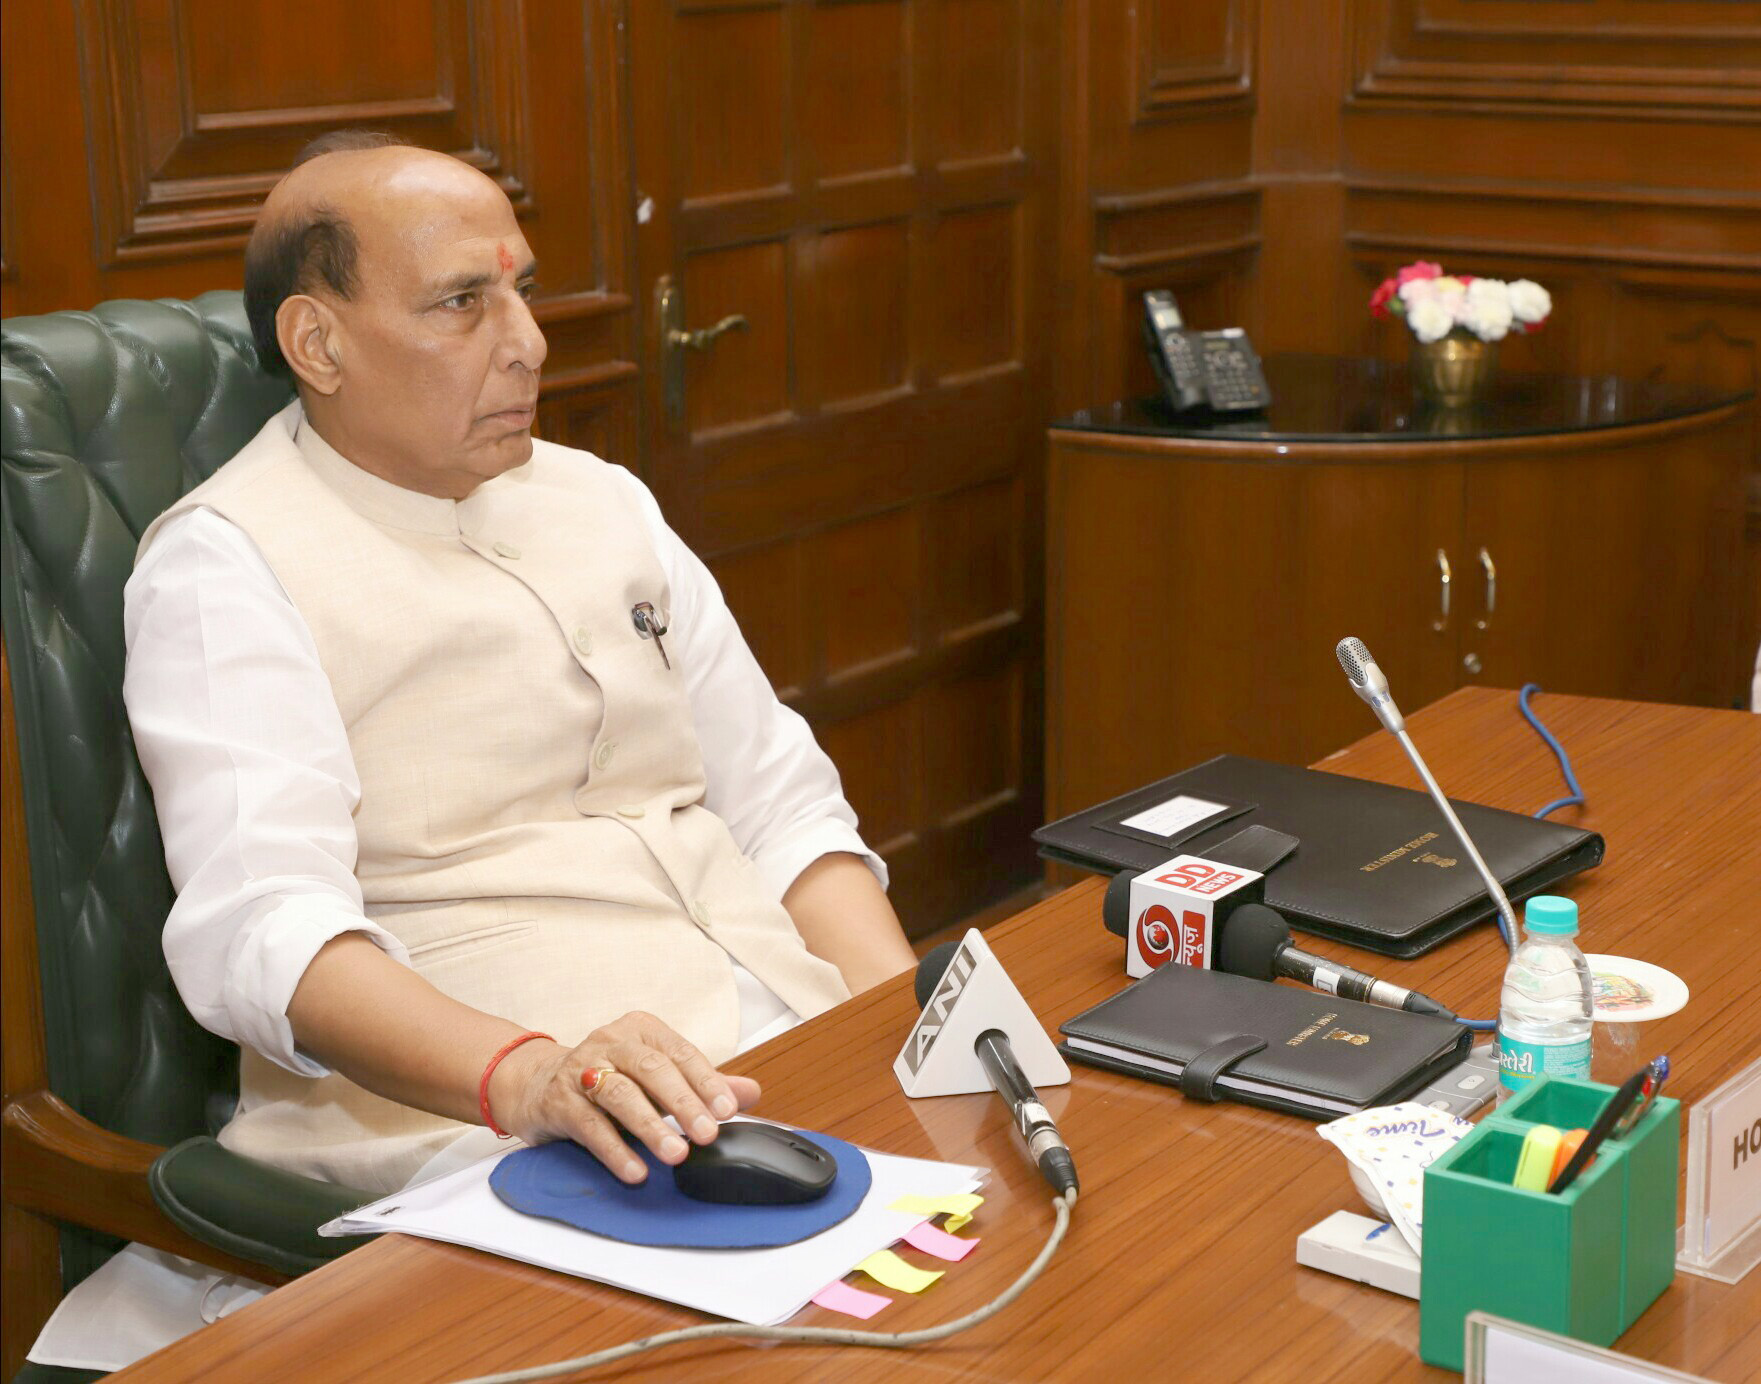 The Union Home Minister, Shri Rajnath Singh launching an Online Analytical Tool to monitor flow of foreign contributions under FCRA, in New Delhi on June 01, 2018.